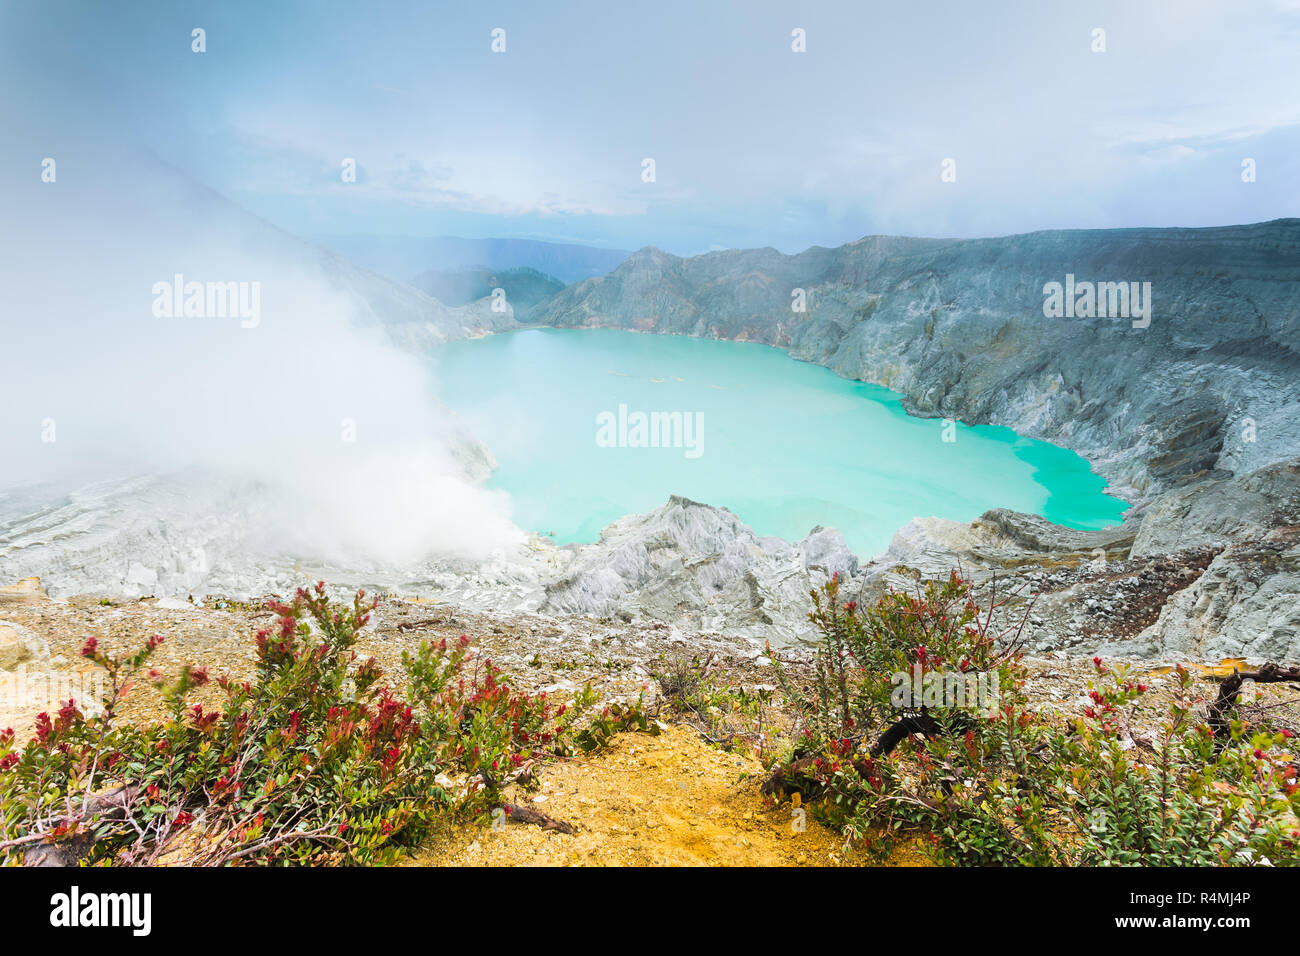 Sulfuric cloud around turquoise lake out from Ijen mountains crater Banyuwangi, Indonesia Stock Photo